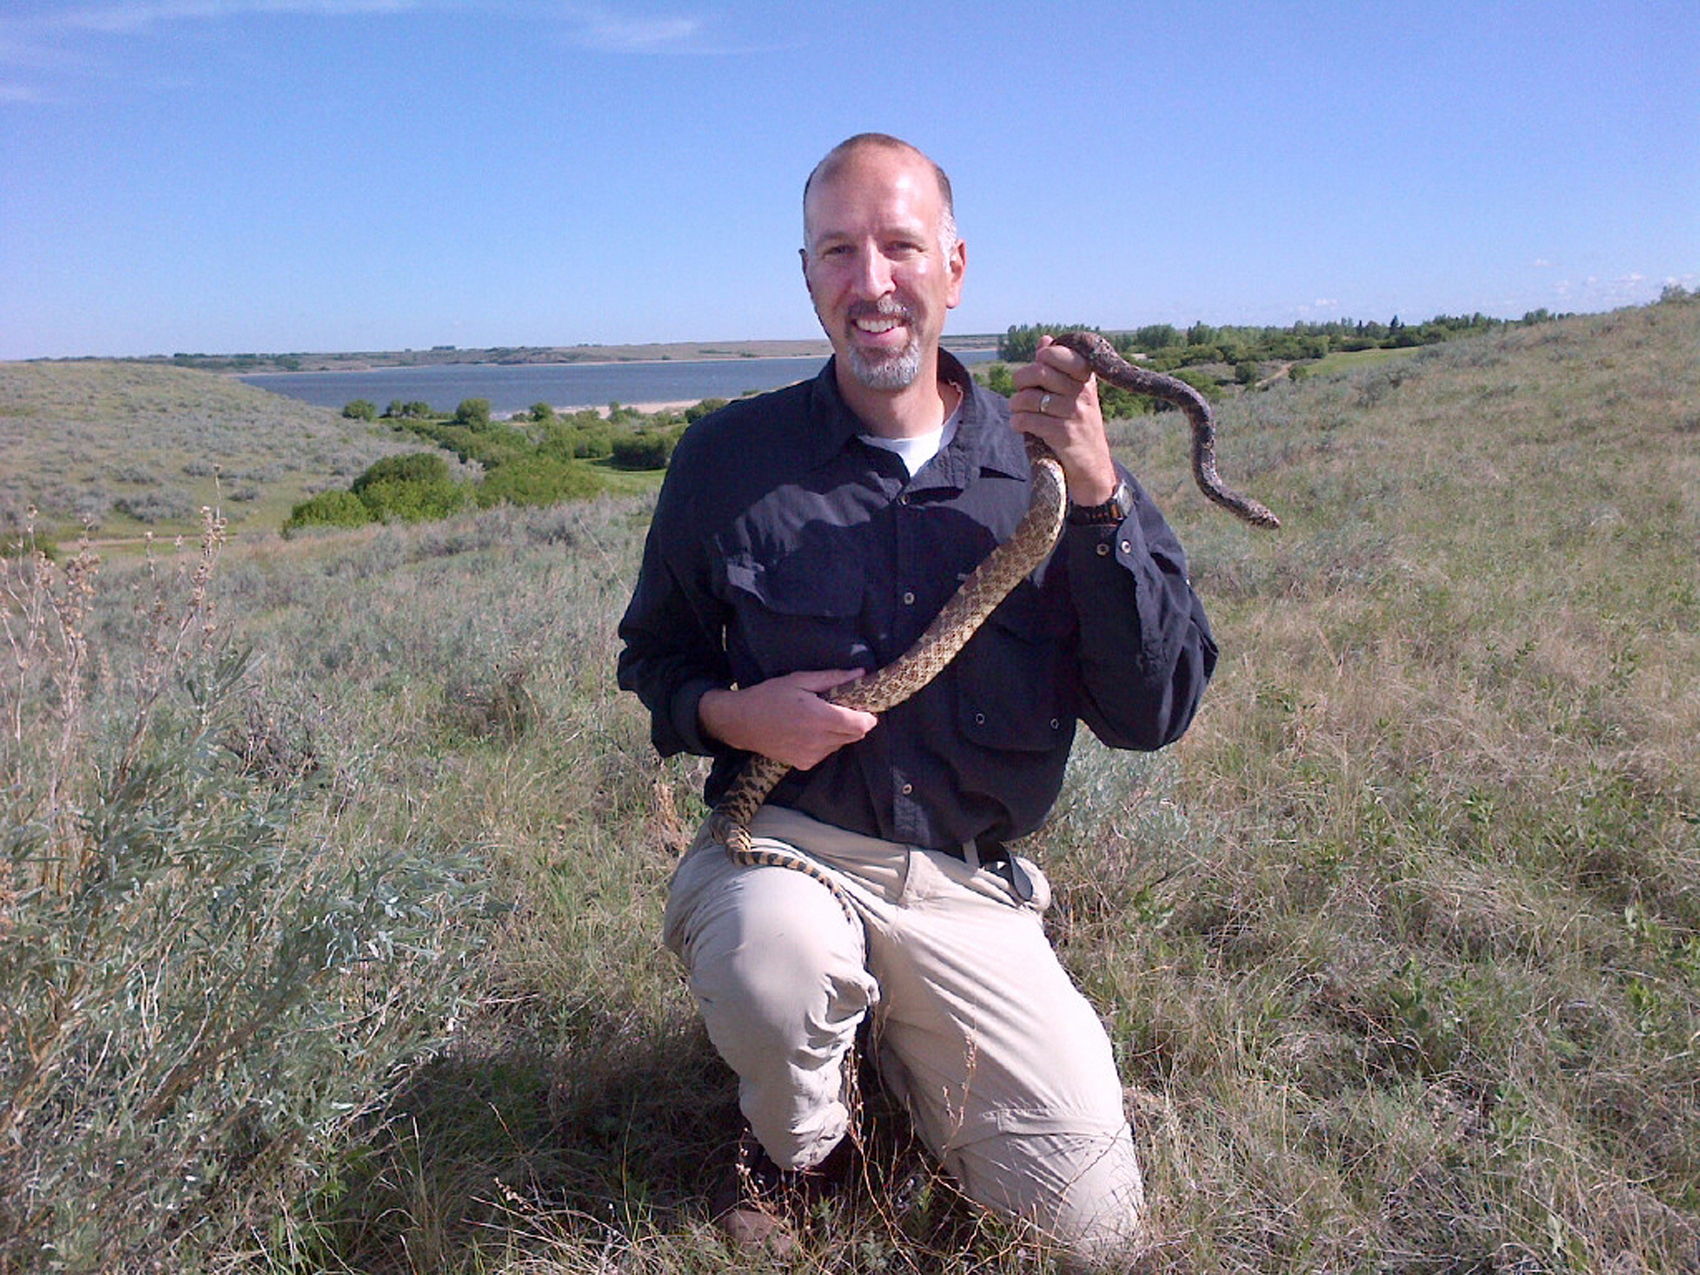 Chris Somers kneels with a bullsnake in his hand.